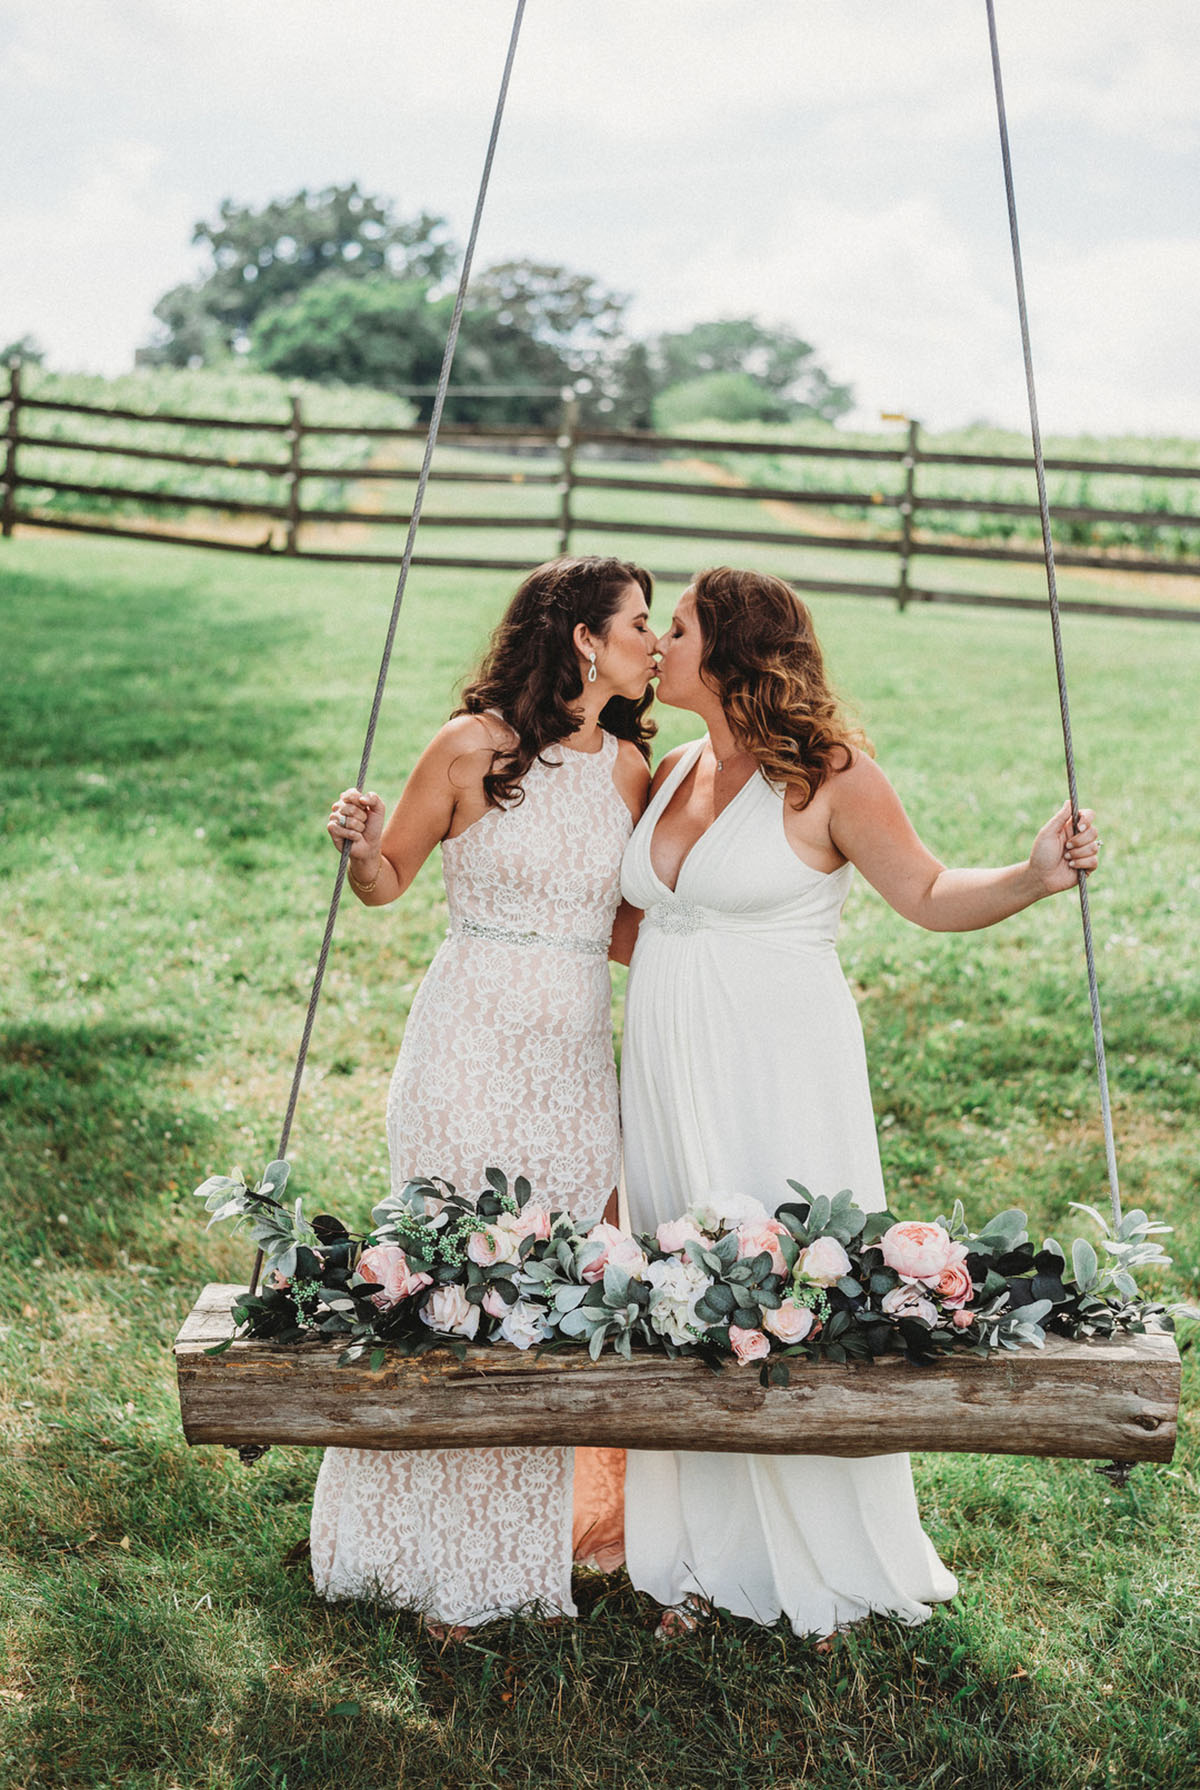 Two brides trash their wedding dresses in a styled shoot swingset kiss